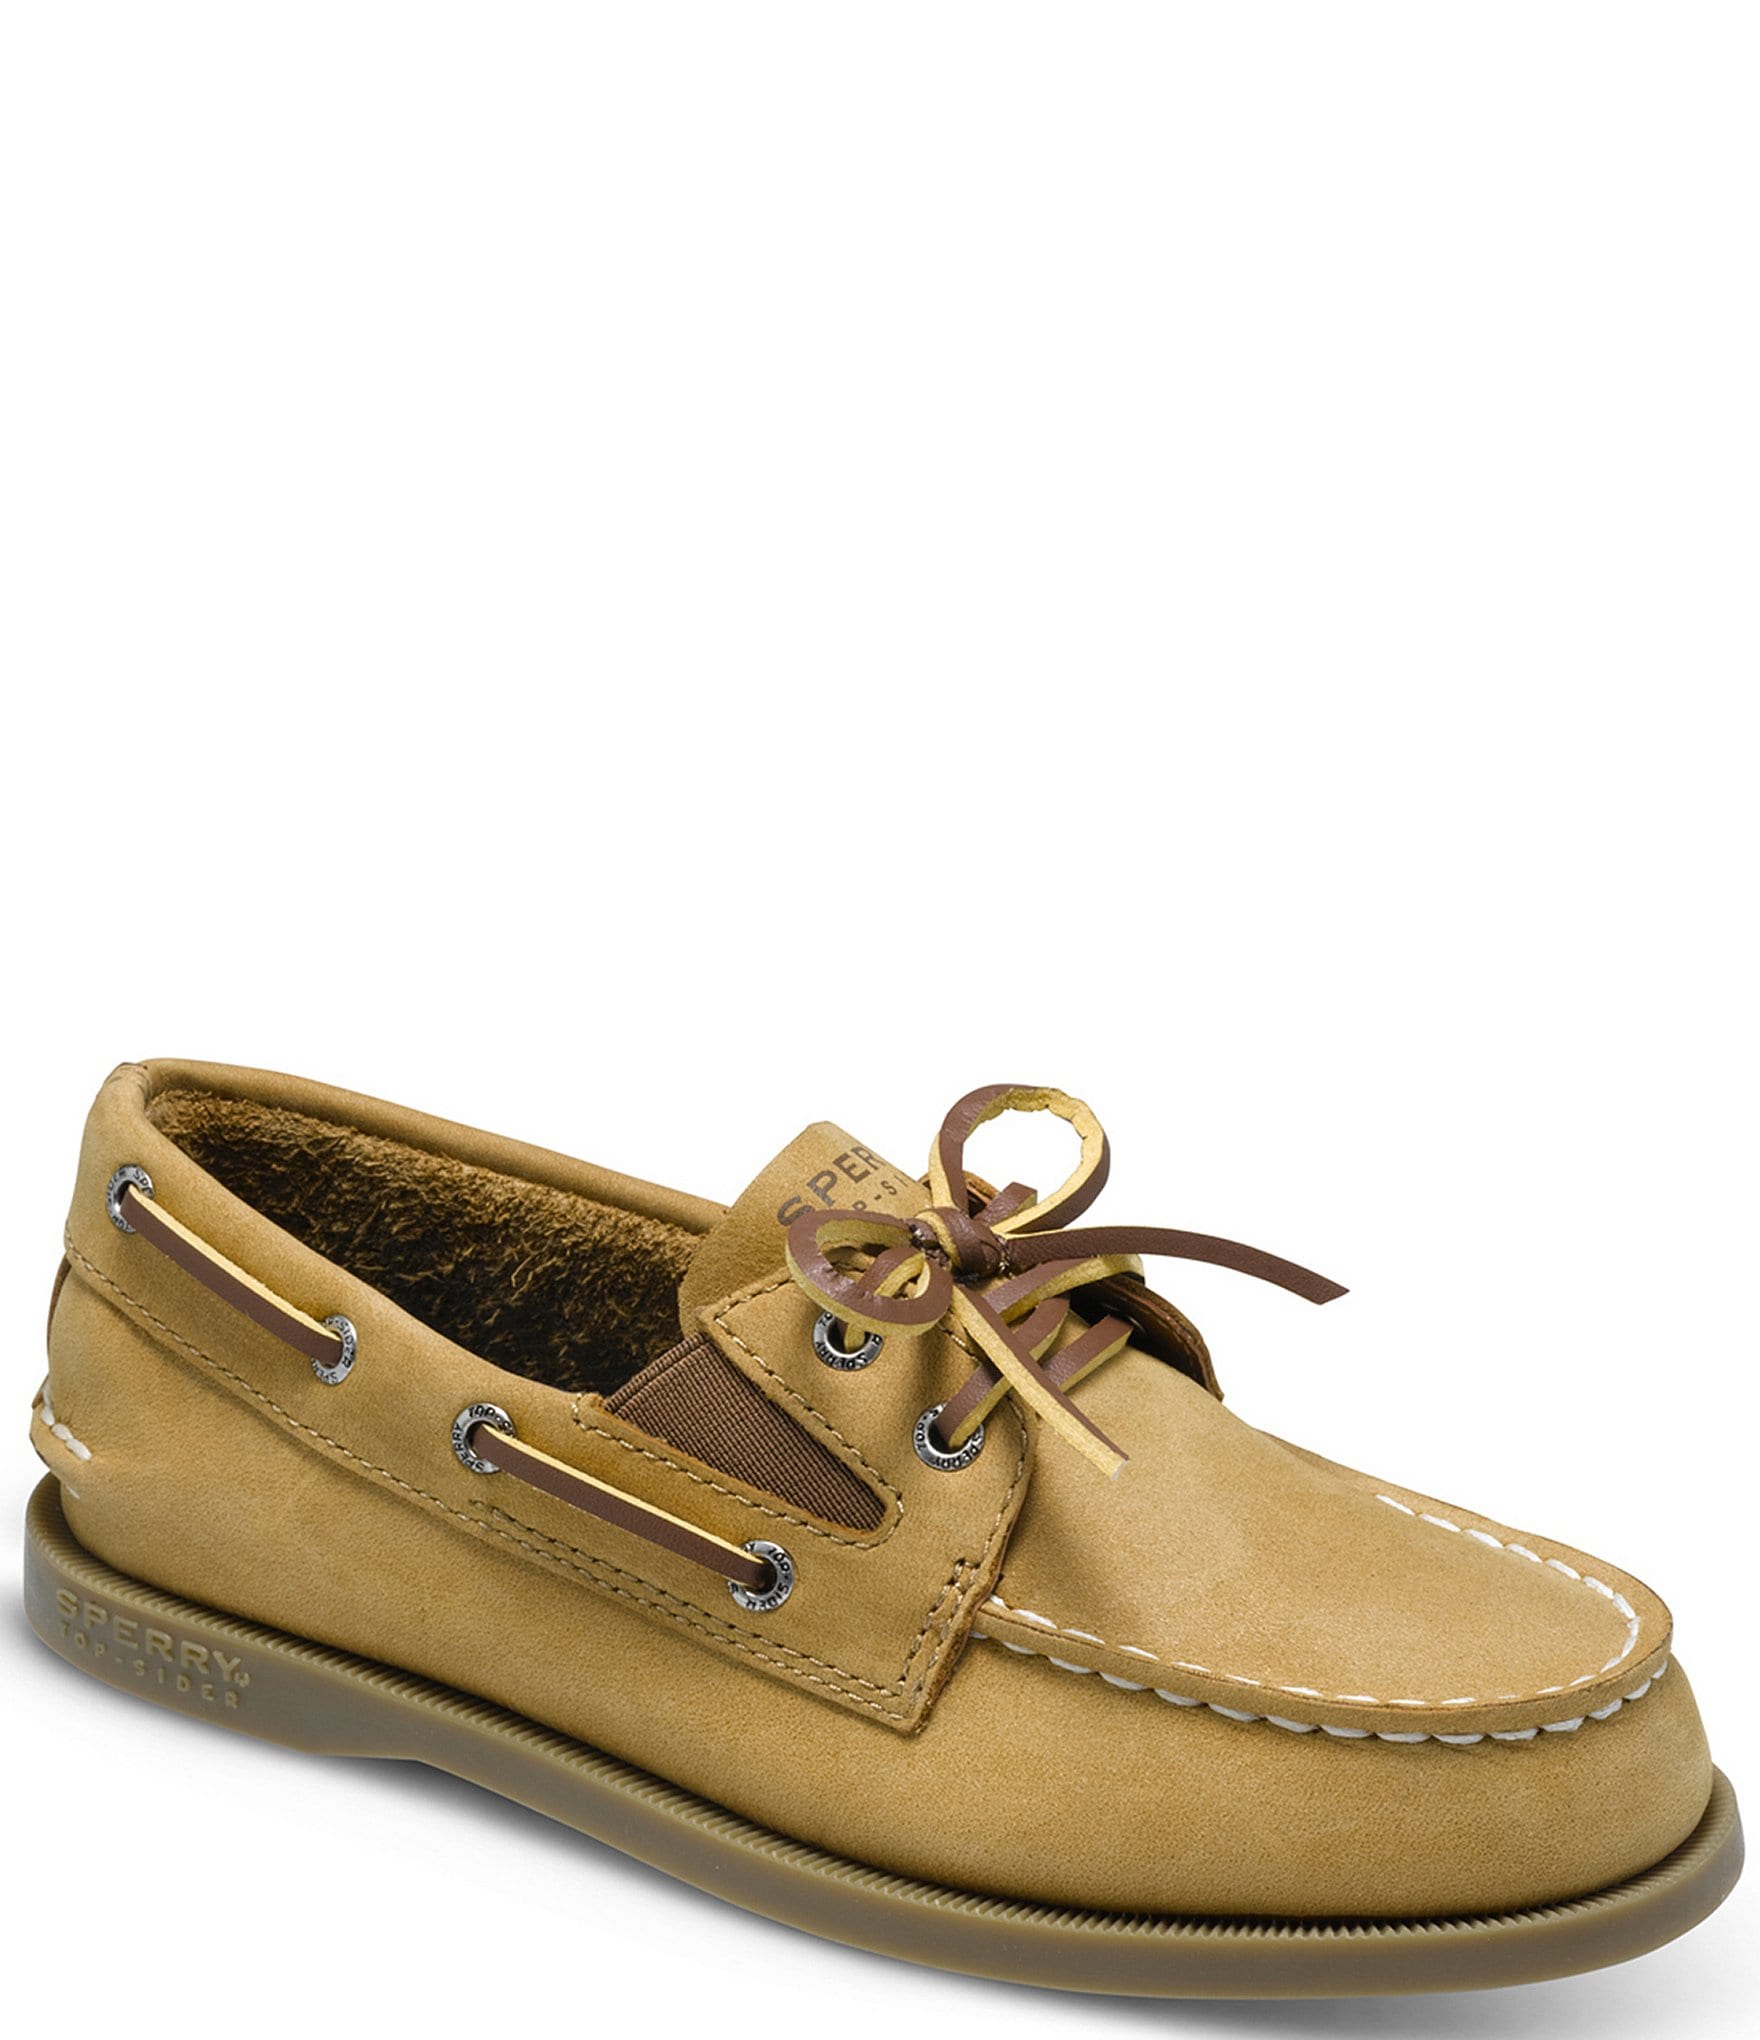 sperry girl shoes